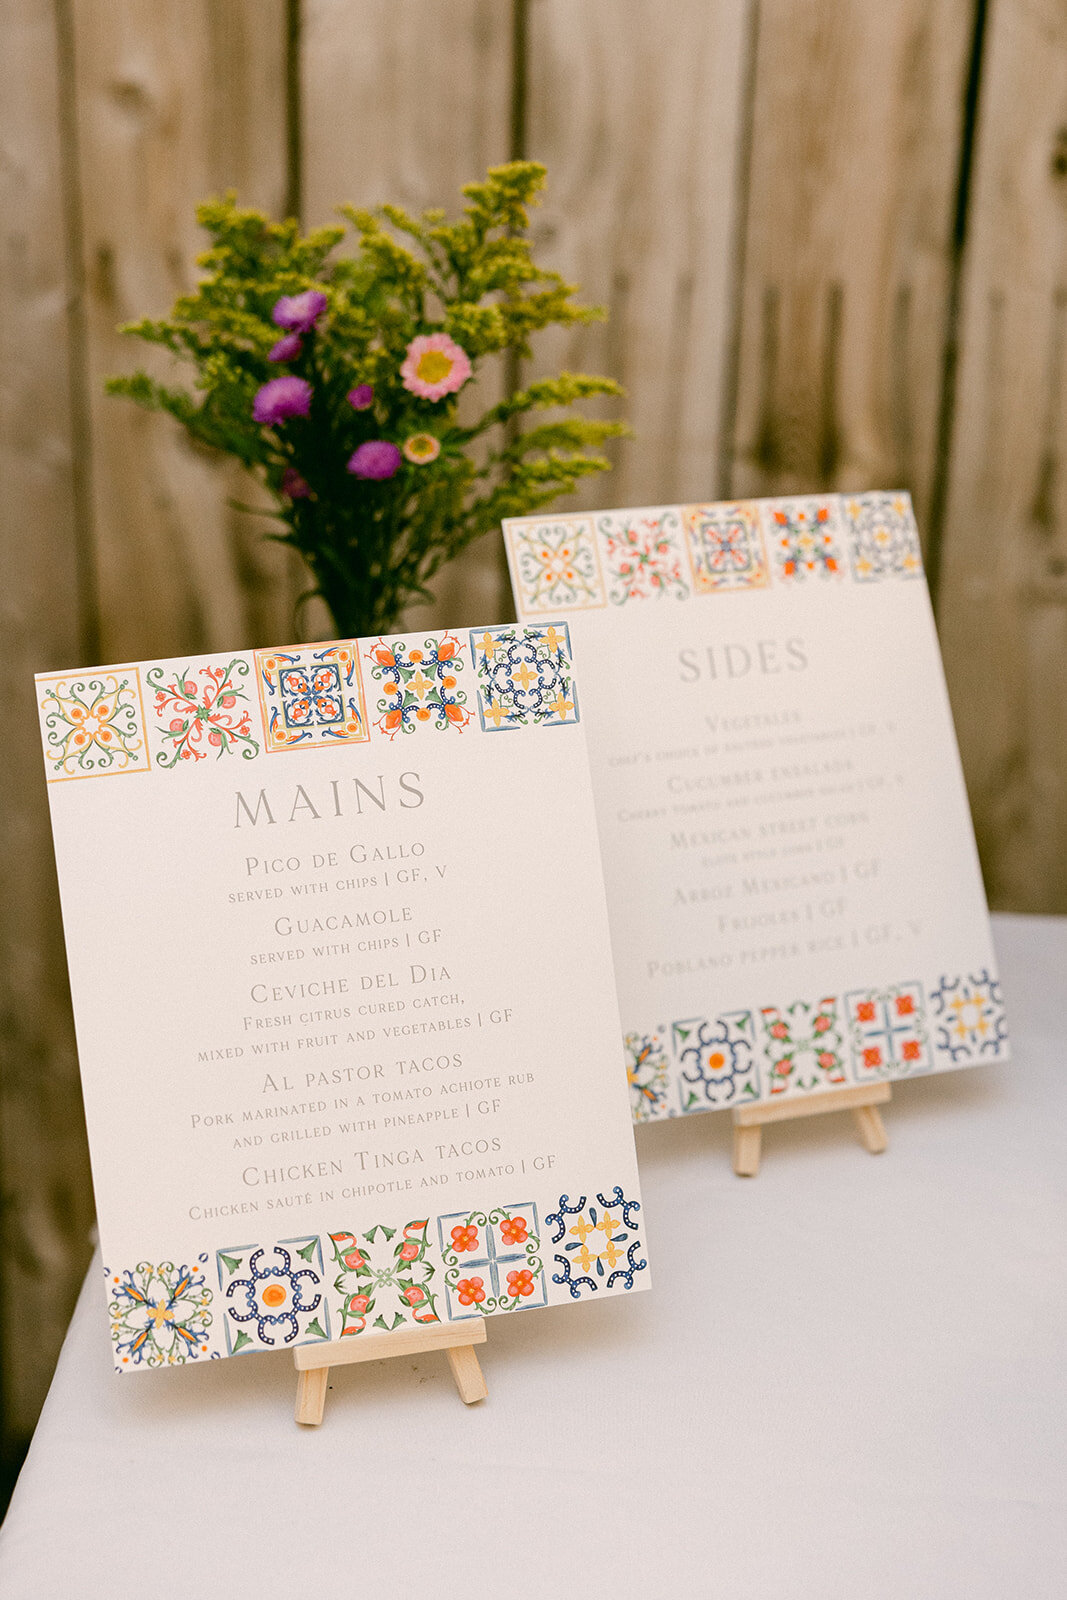 Verve Event Co. The Lake House Fingerlakes Weddings Laura Rose Photography Stationary Loria Letters-228